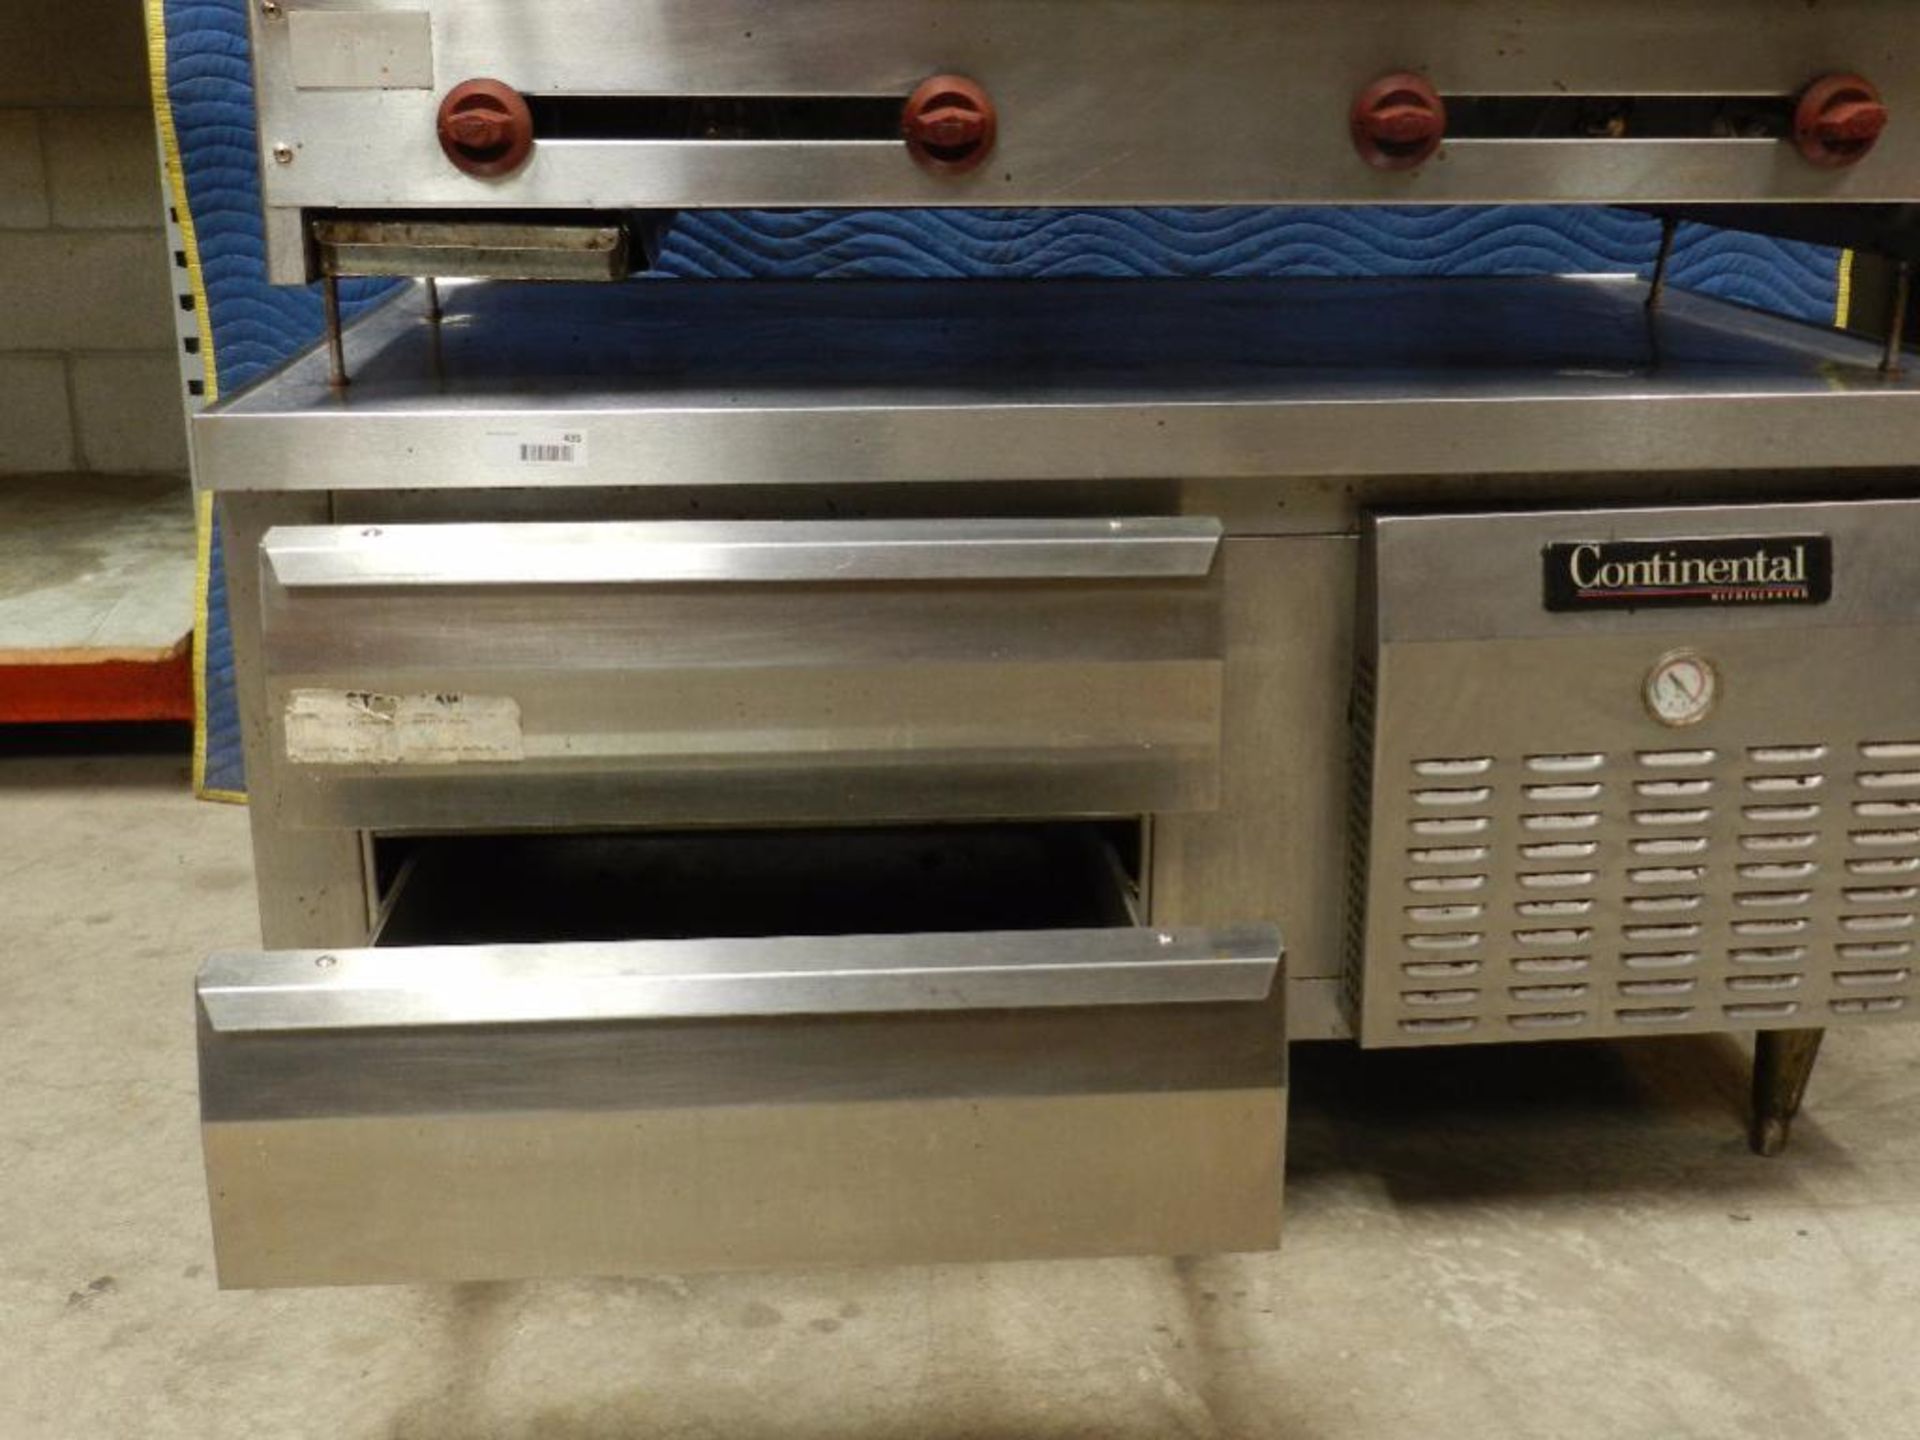 Refrigerated two drawer chef base. stainless steel. Continental make. Trayless. - Image 2 of 2